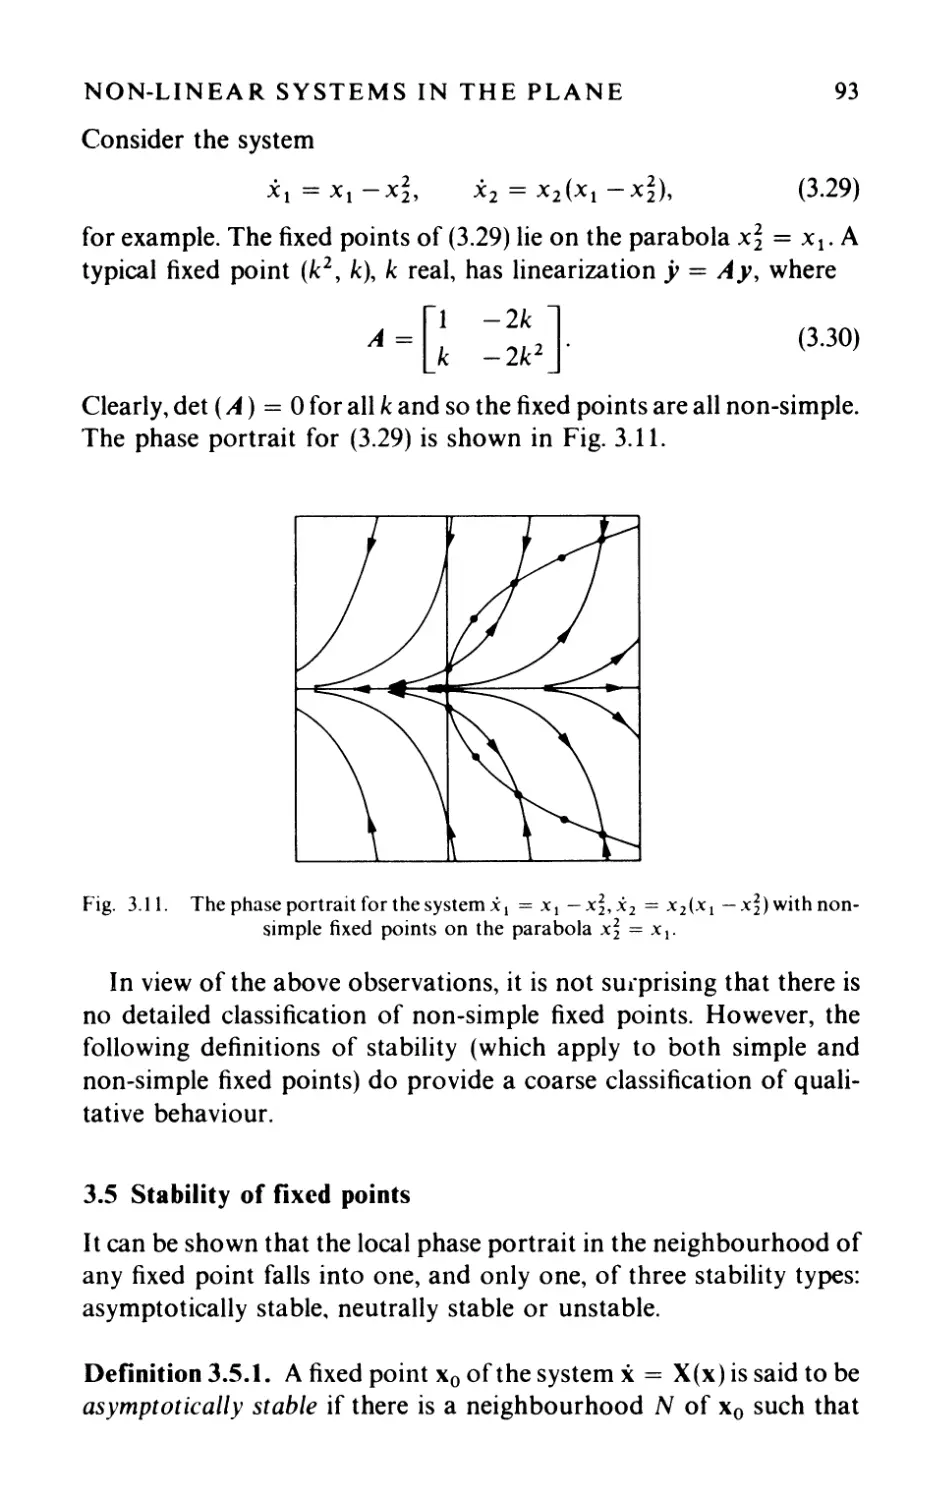 3.5 Stability of fixed points